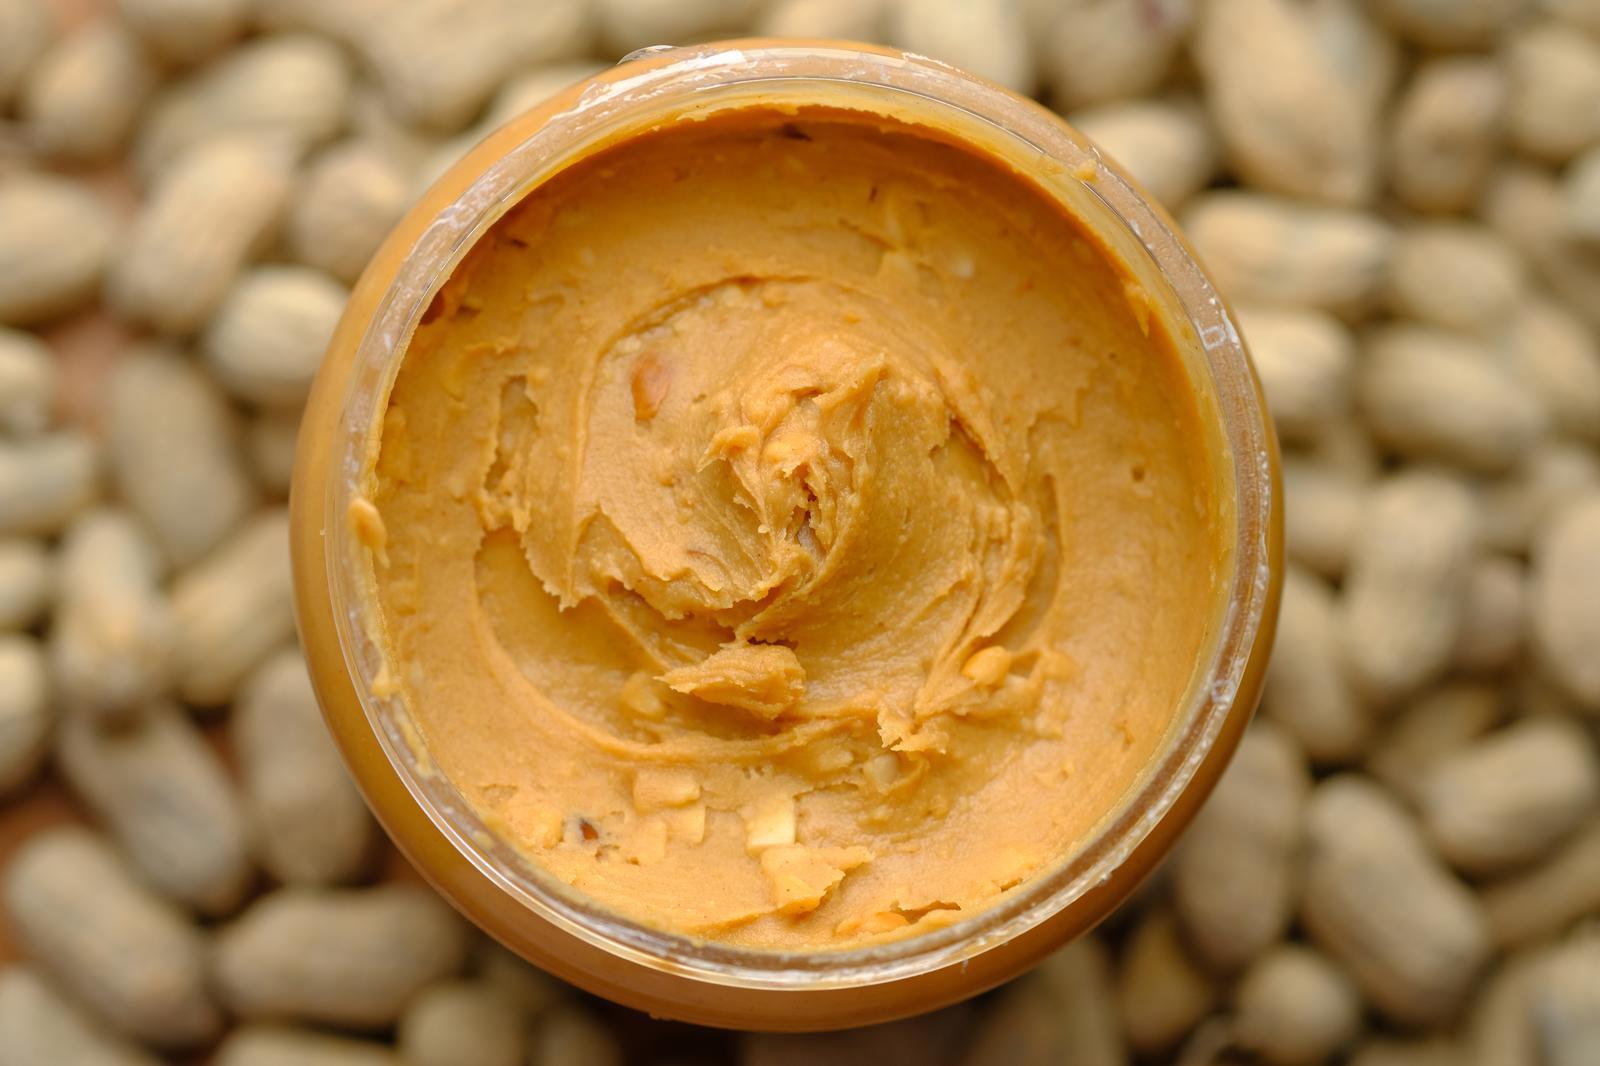 What Dessert Flavor Are You? Peanut butter